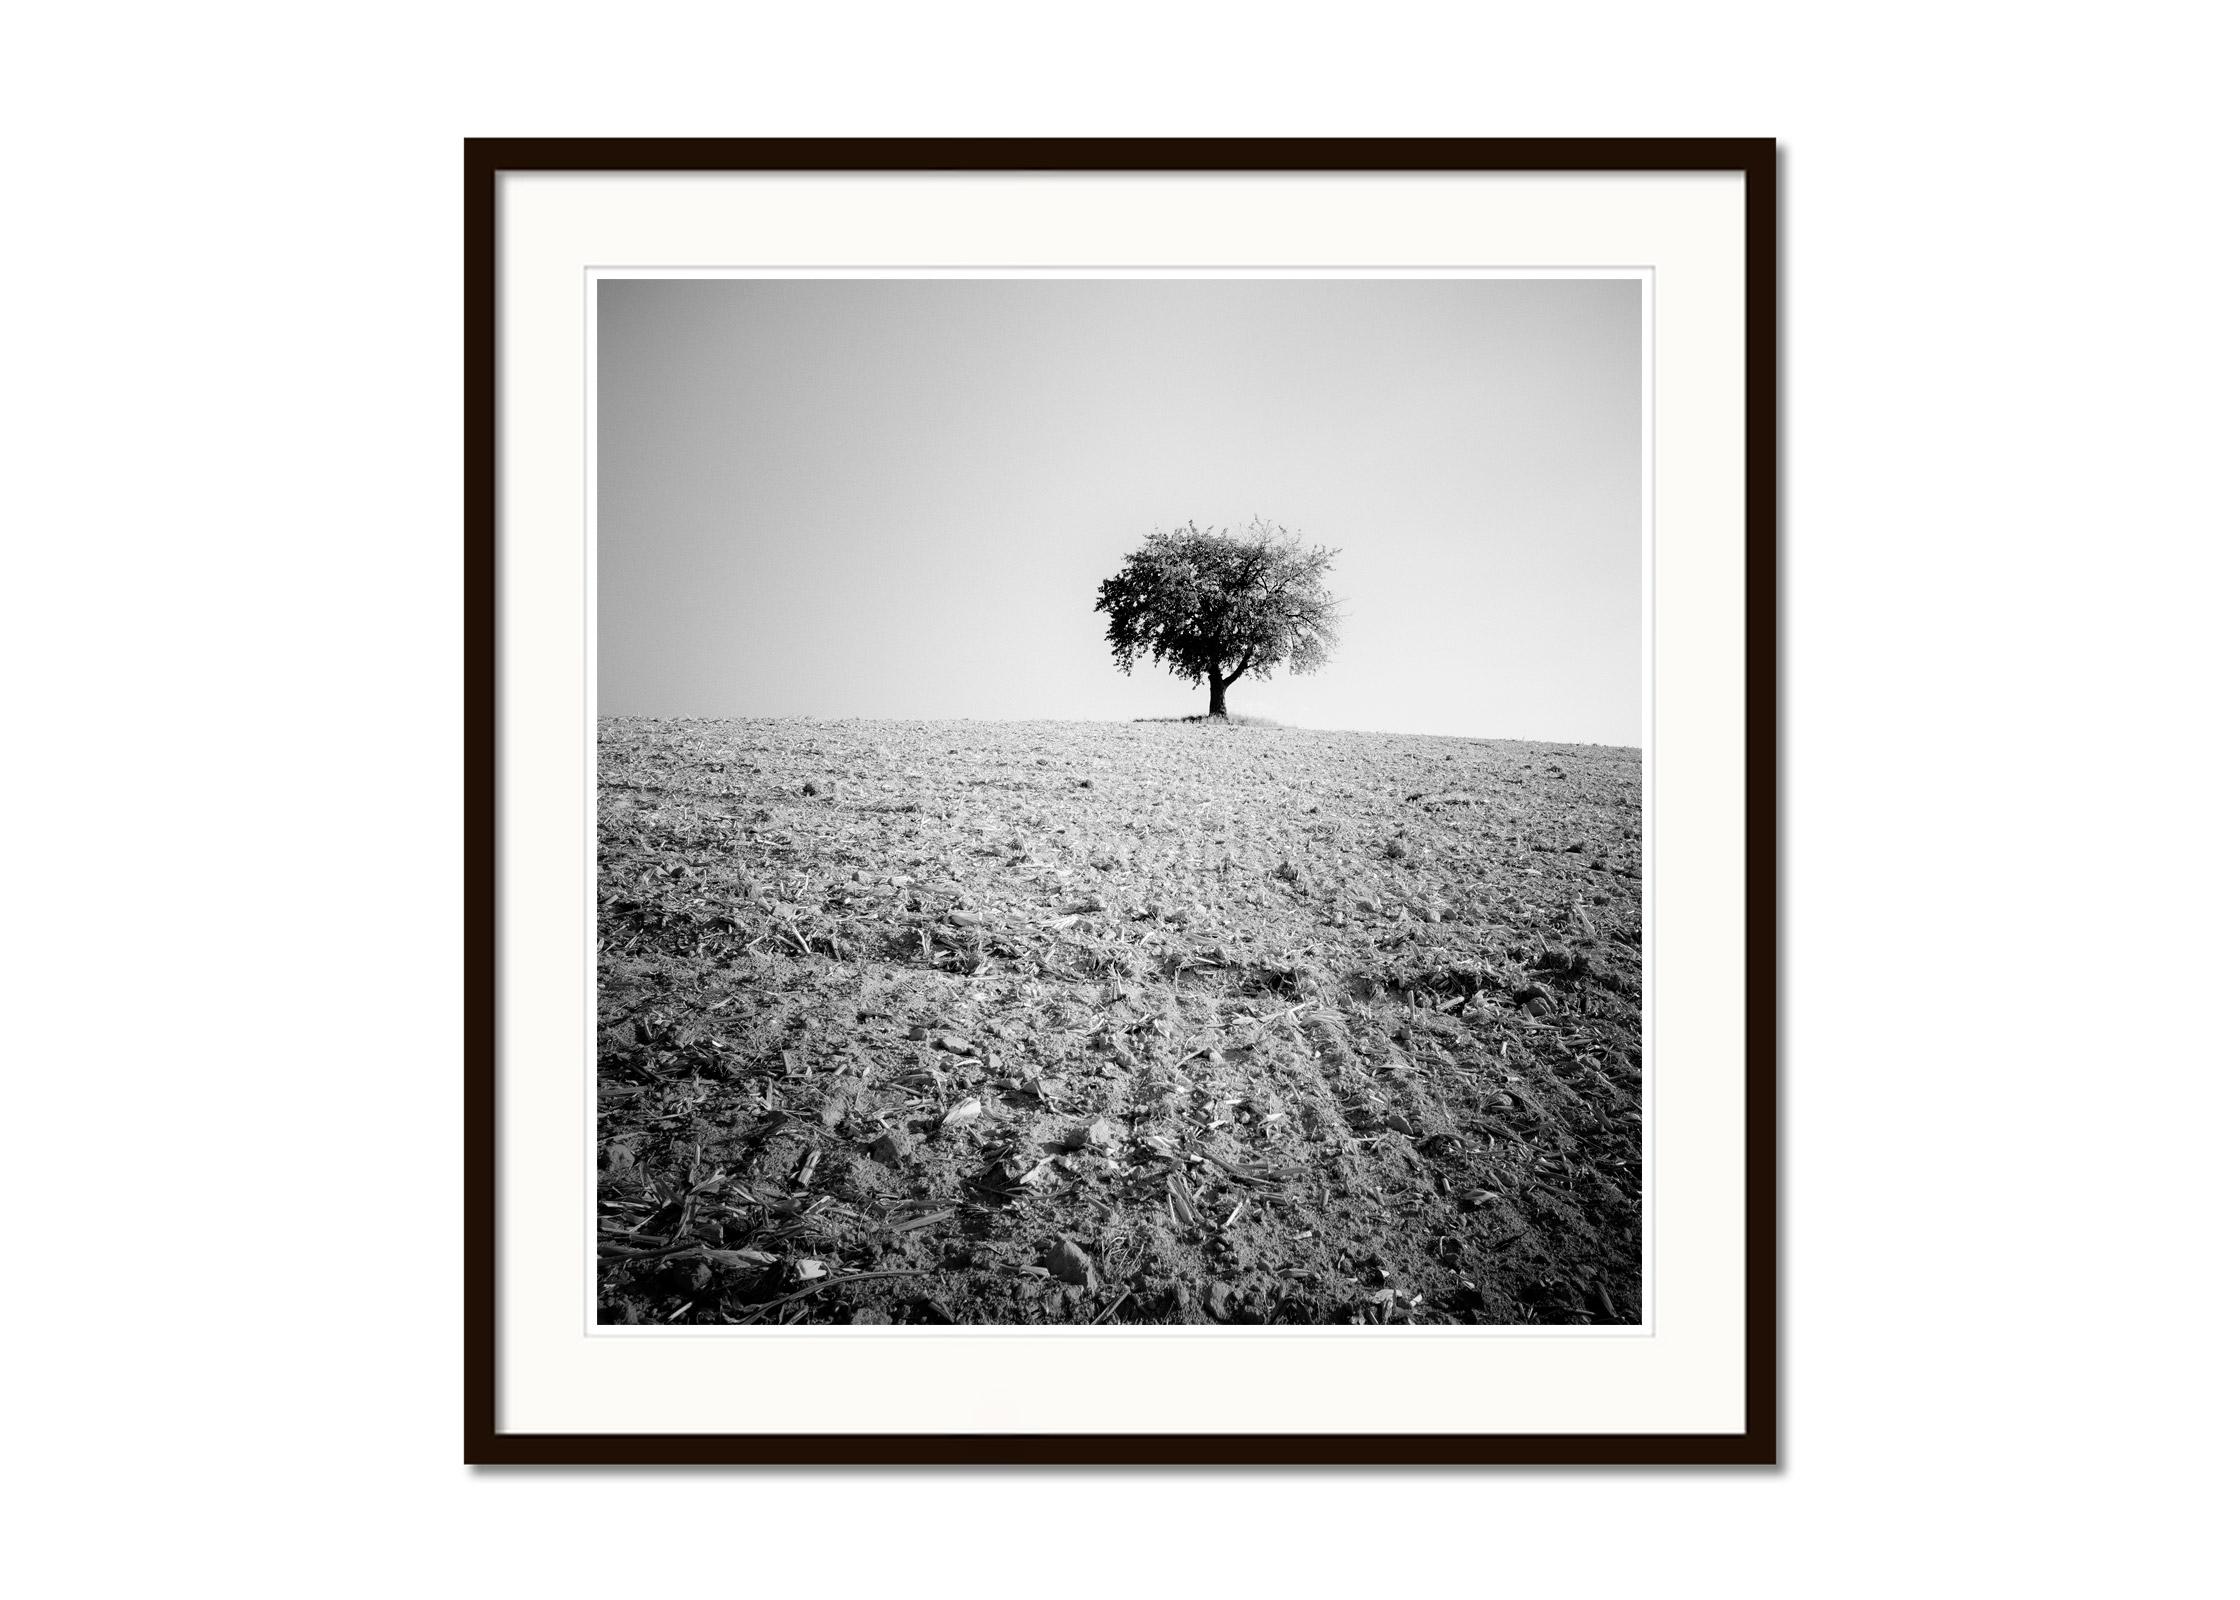 Lonely Tree, harvested Field, black and white minimalist photography, landscape - Gray Landscape Photograph by Gerald Berghammer